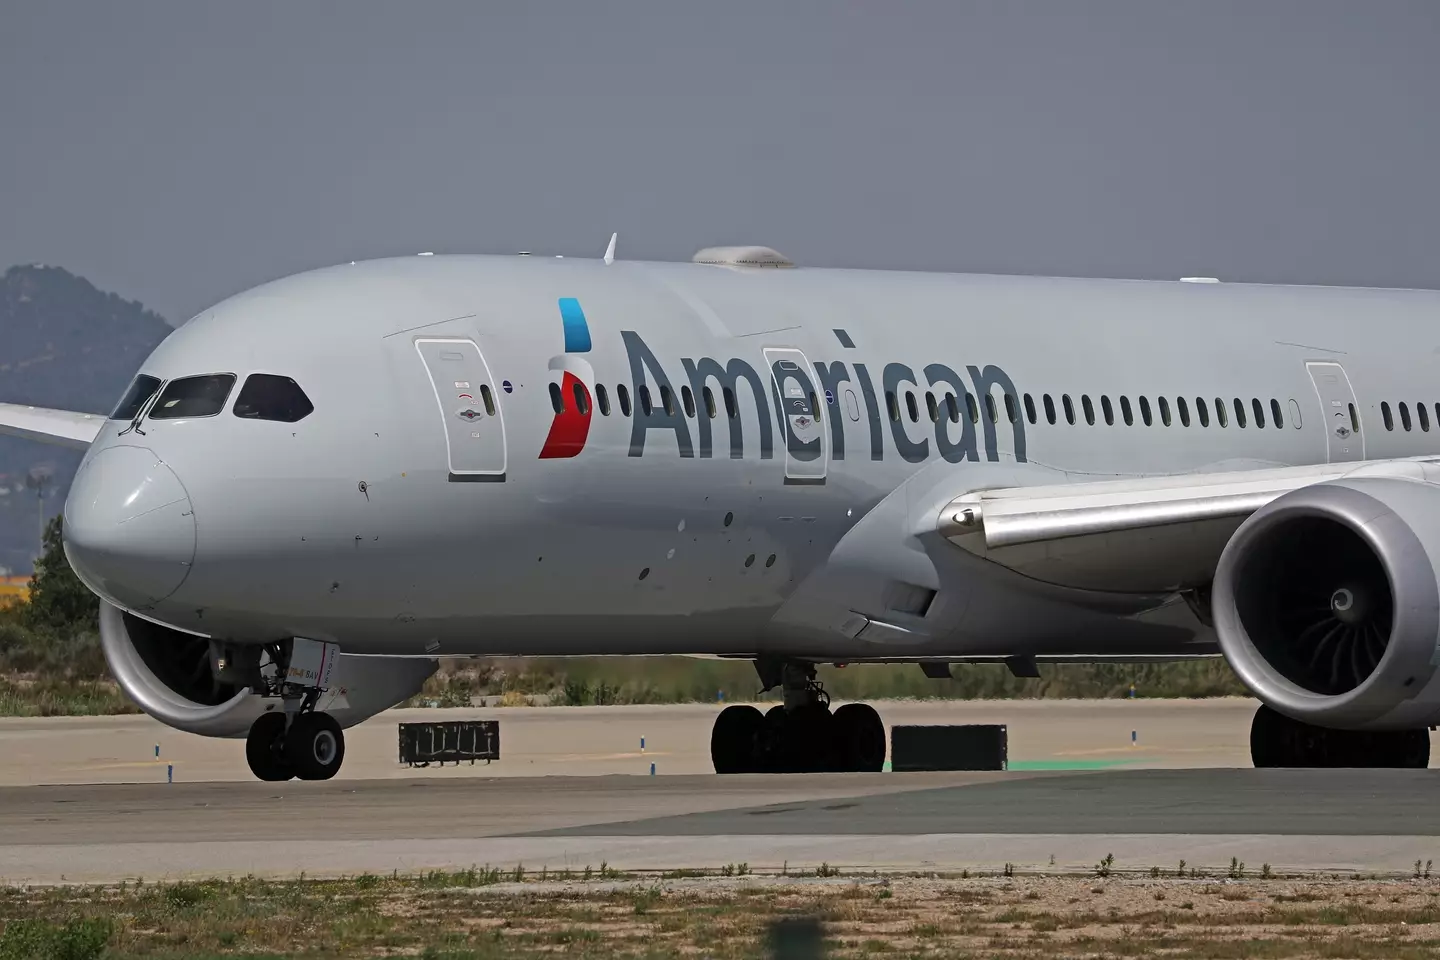 American Airlines has confirmed that the plane was redirected.